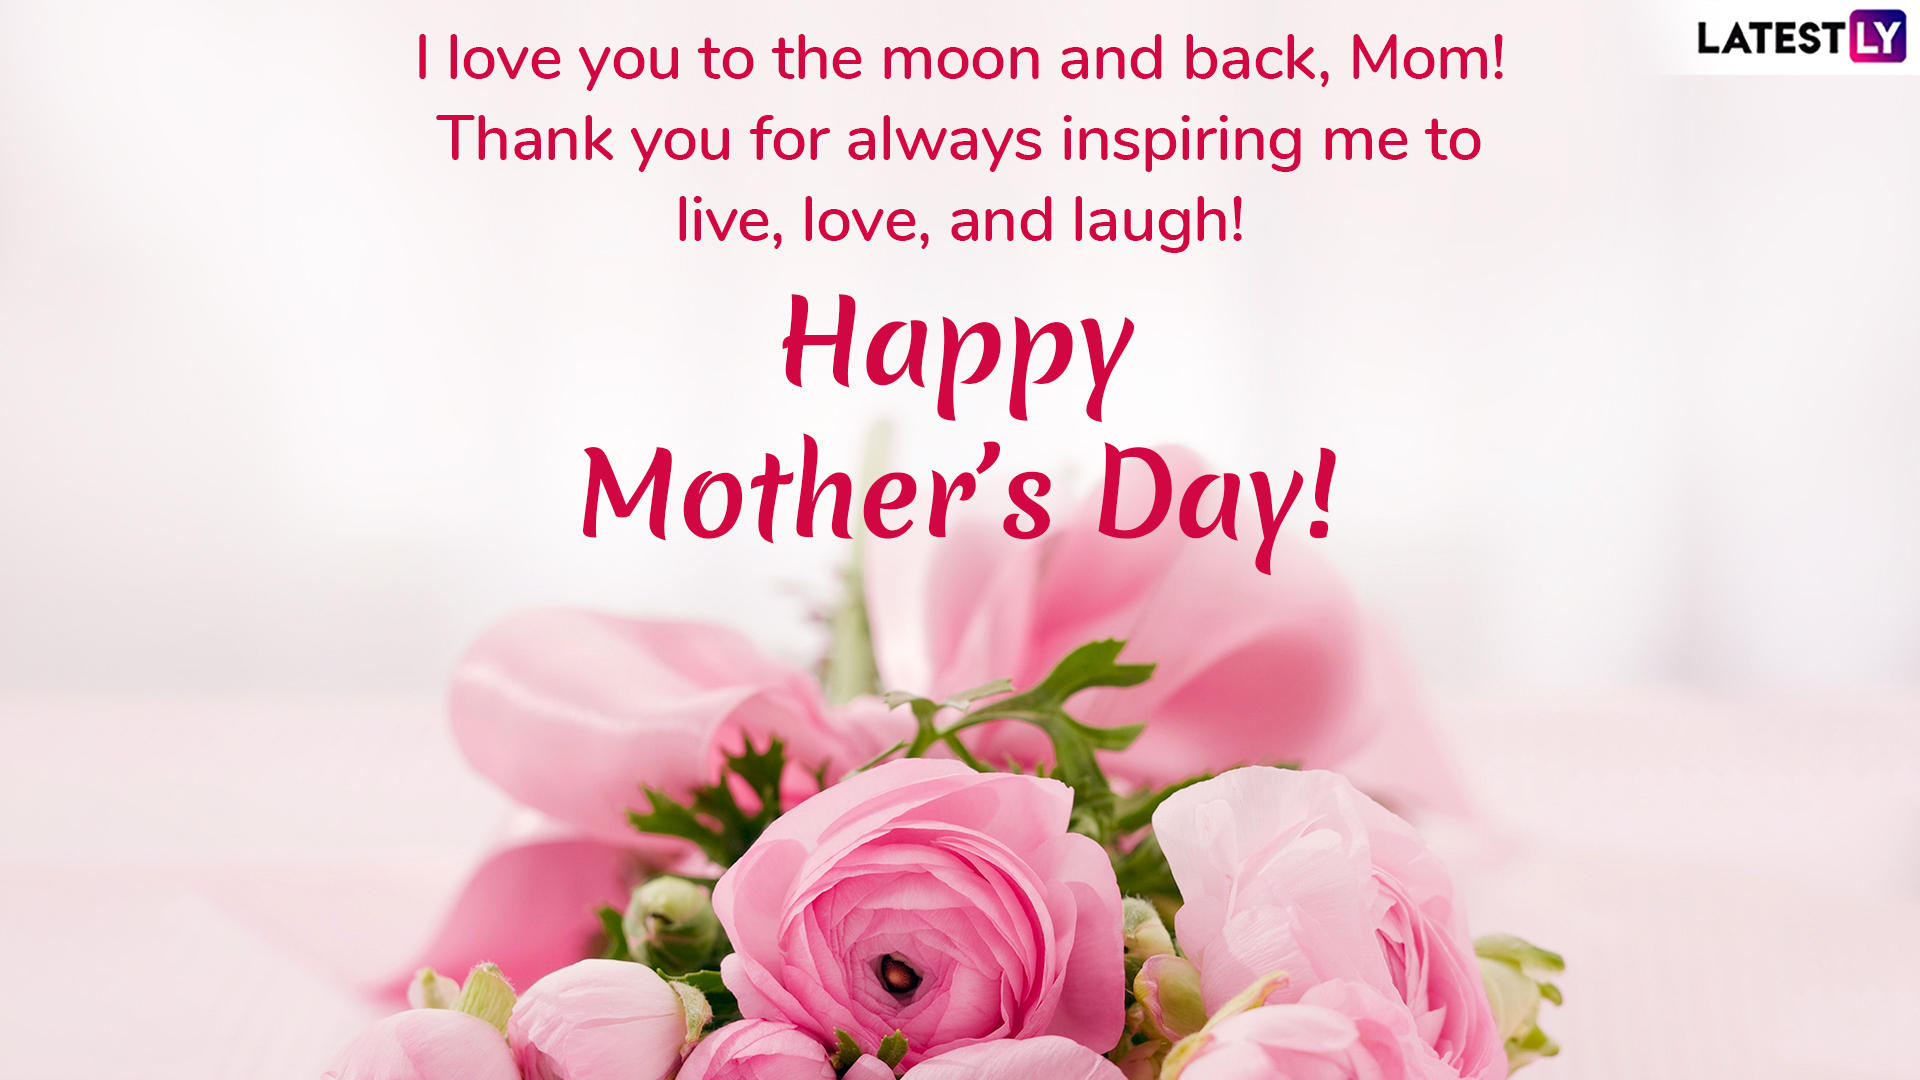 Happy Mother’s Day 2019 Greeting Cards Send These Wishes, Quotes